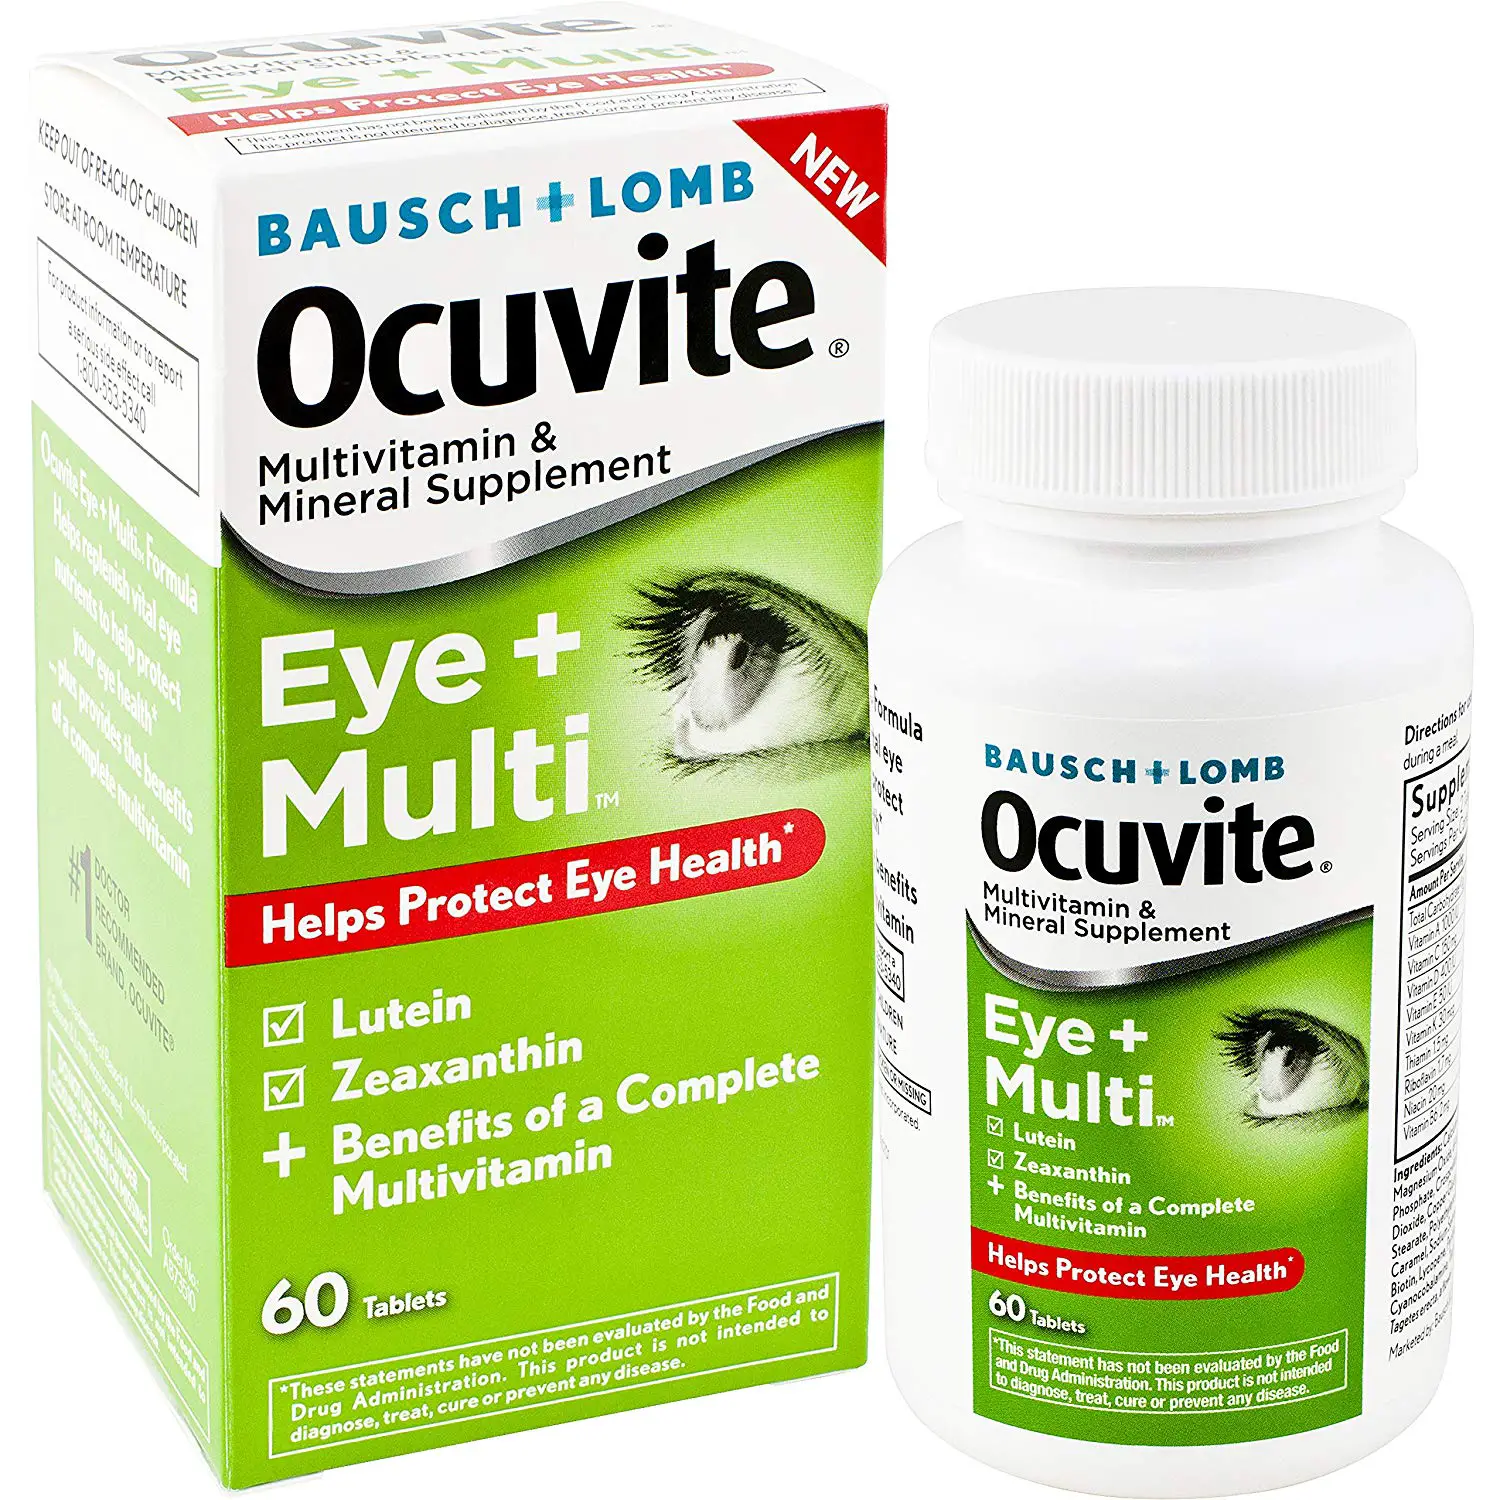 Bausch + Lomb Ocuvite Eye and Multi Multivitamin and ...